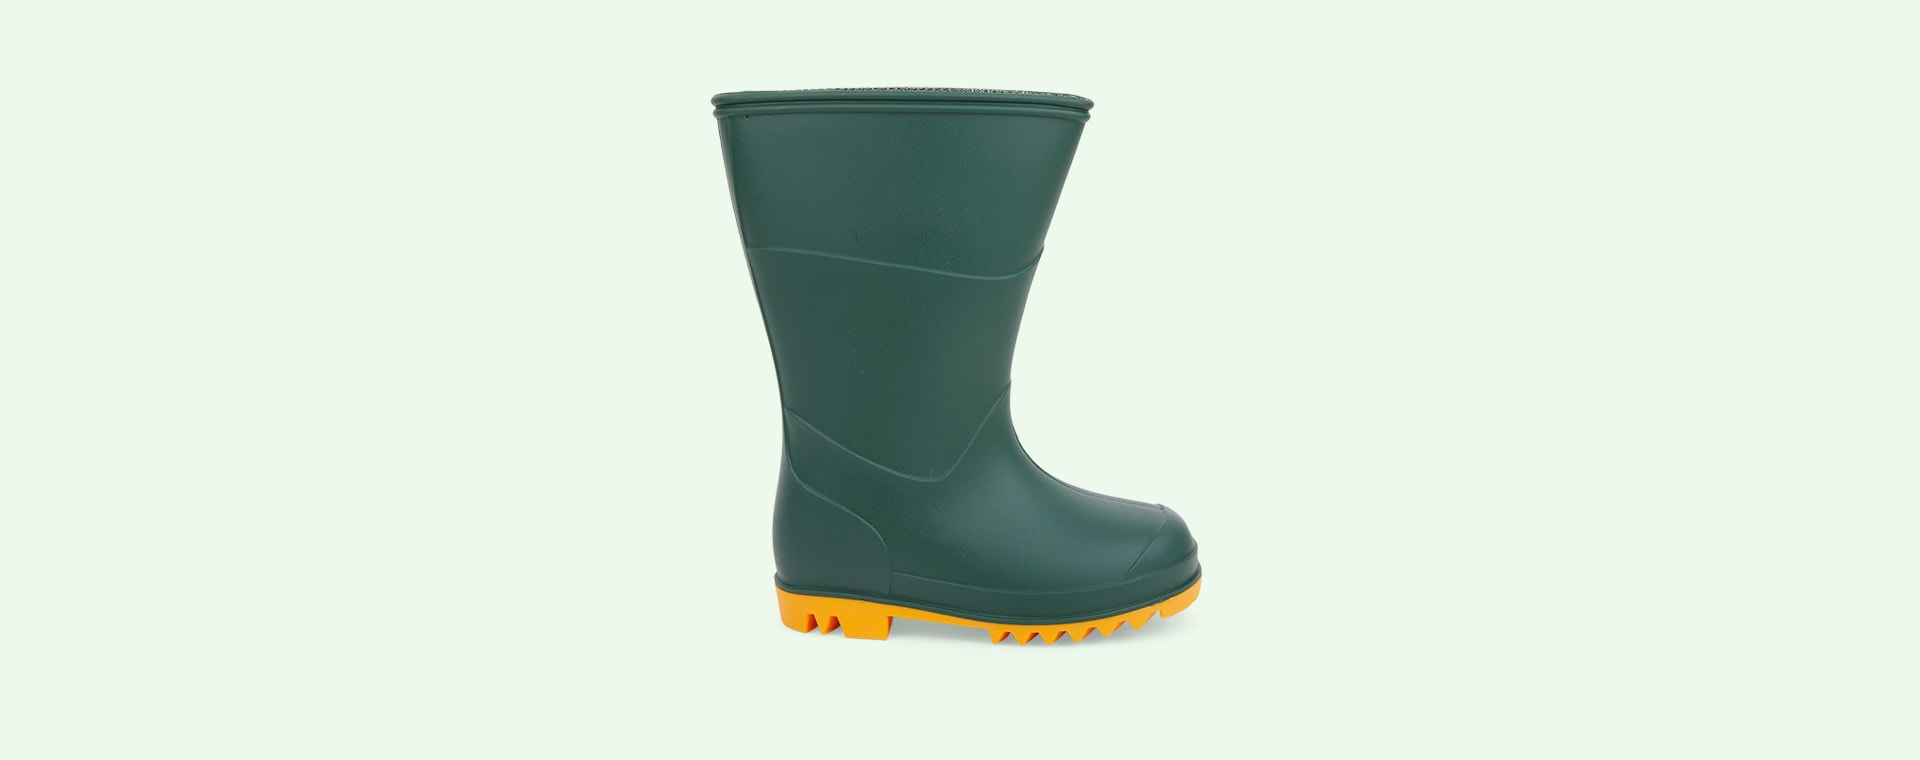 Green Muddy Puddles Classic Wellies